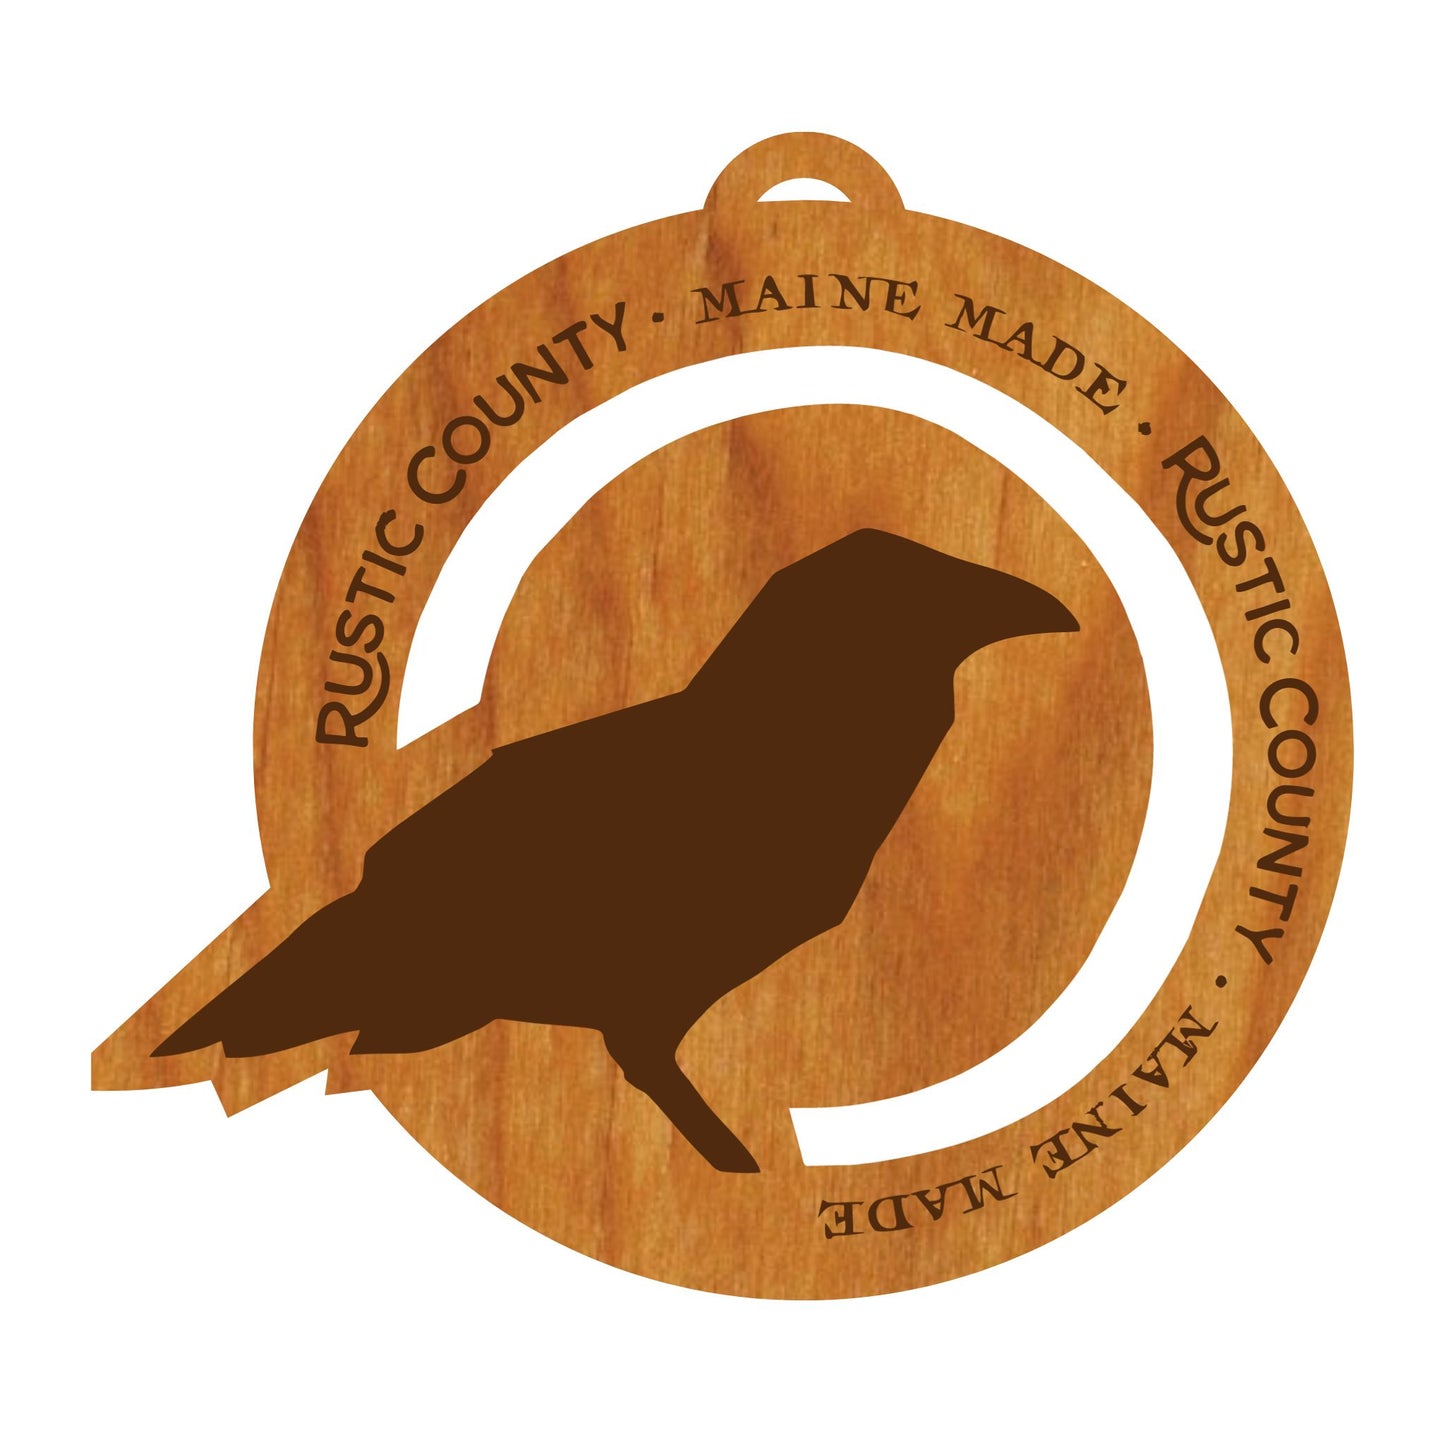 A wooden coaster with a burnt-in design of a crow silhouette, encircled by text that reads "Rustic County Maine made. Rustic made." designed to appear like a vintage label, the Rustic County Ornament.